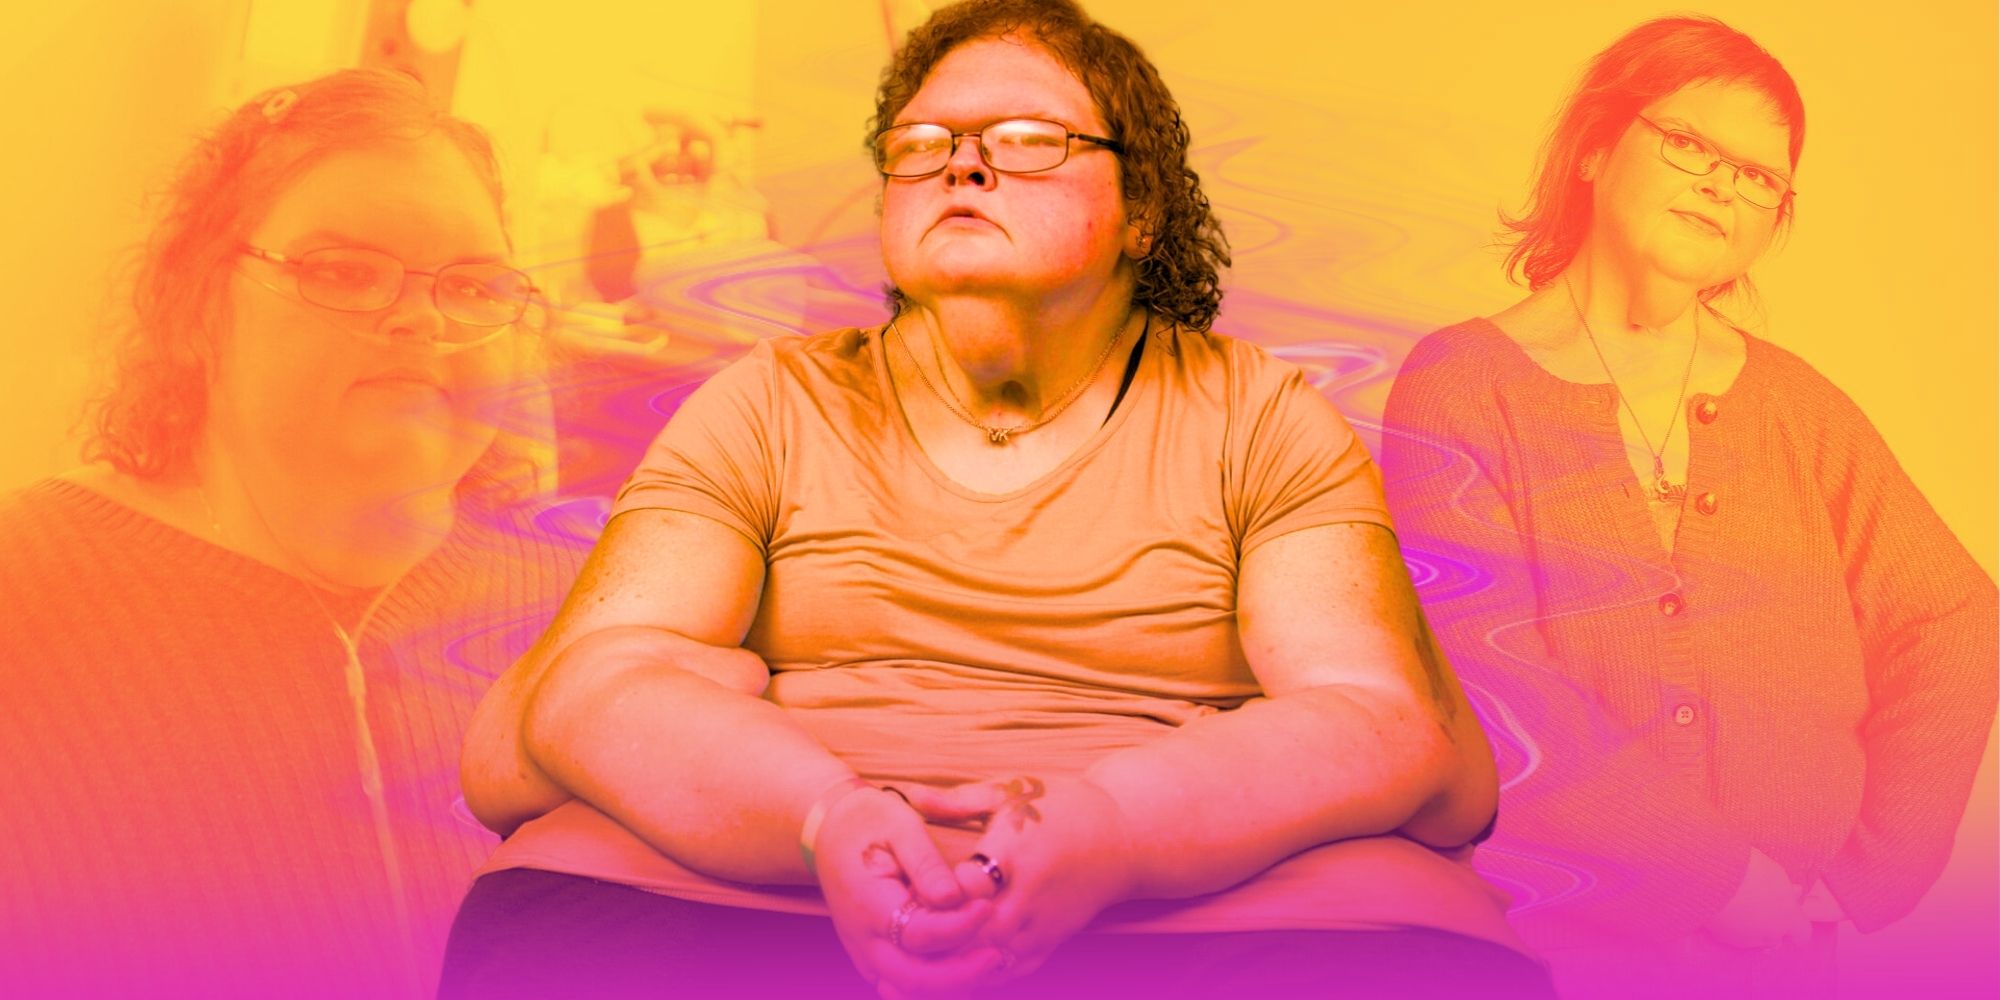 1000-Lb Sisters Tammy Slaton in orange t-shirt sitting down with eyes closed